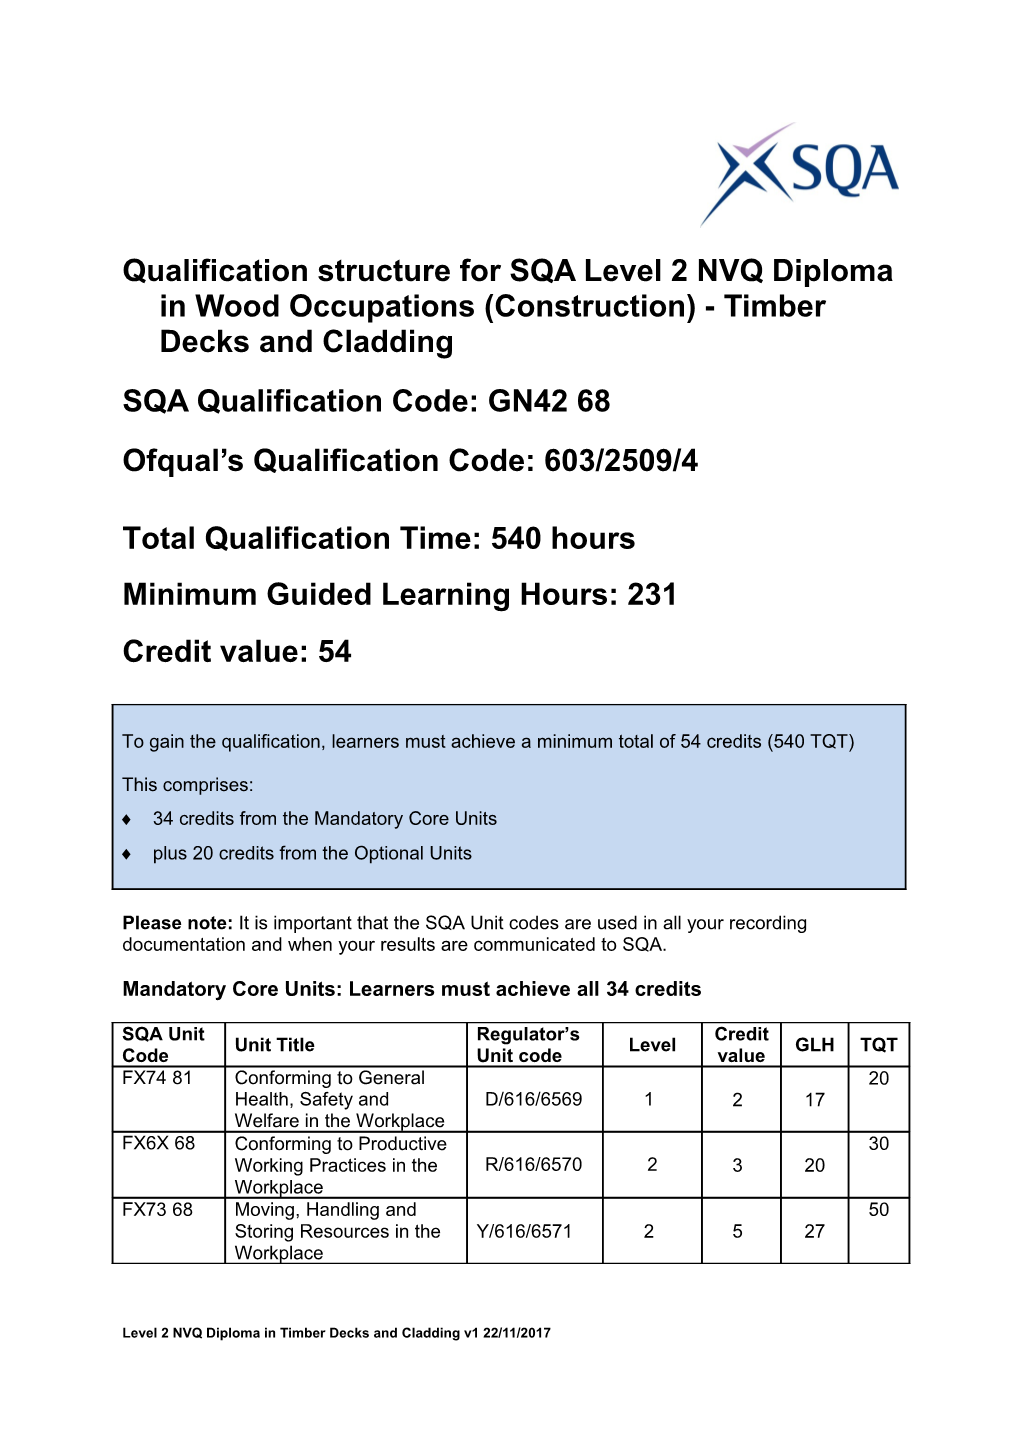 SQA Qualification Code:GN42 68